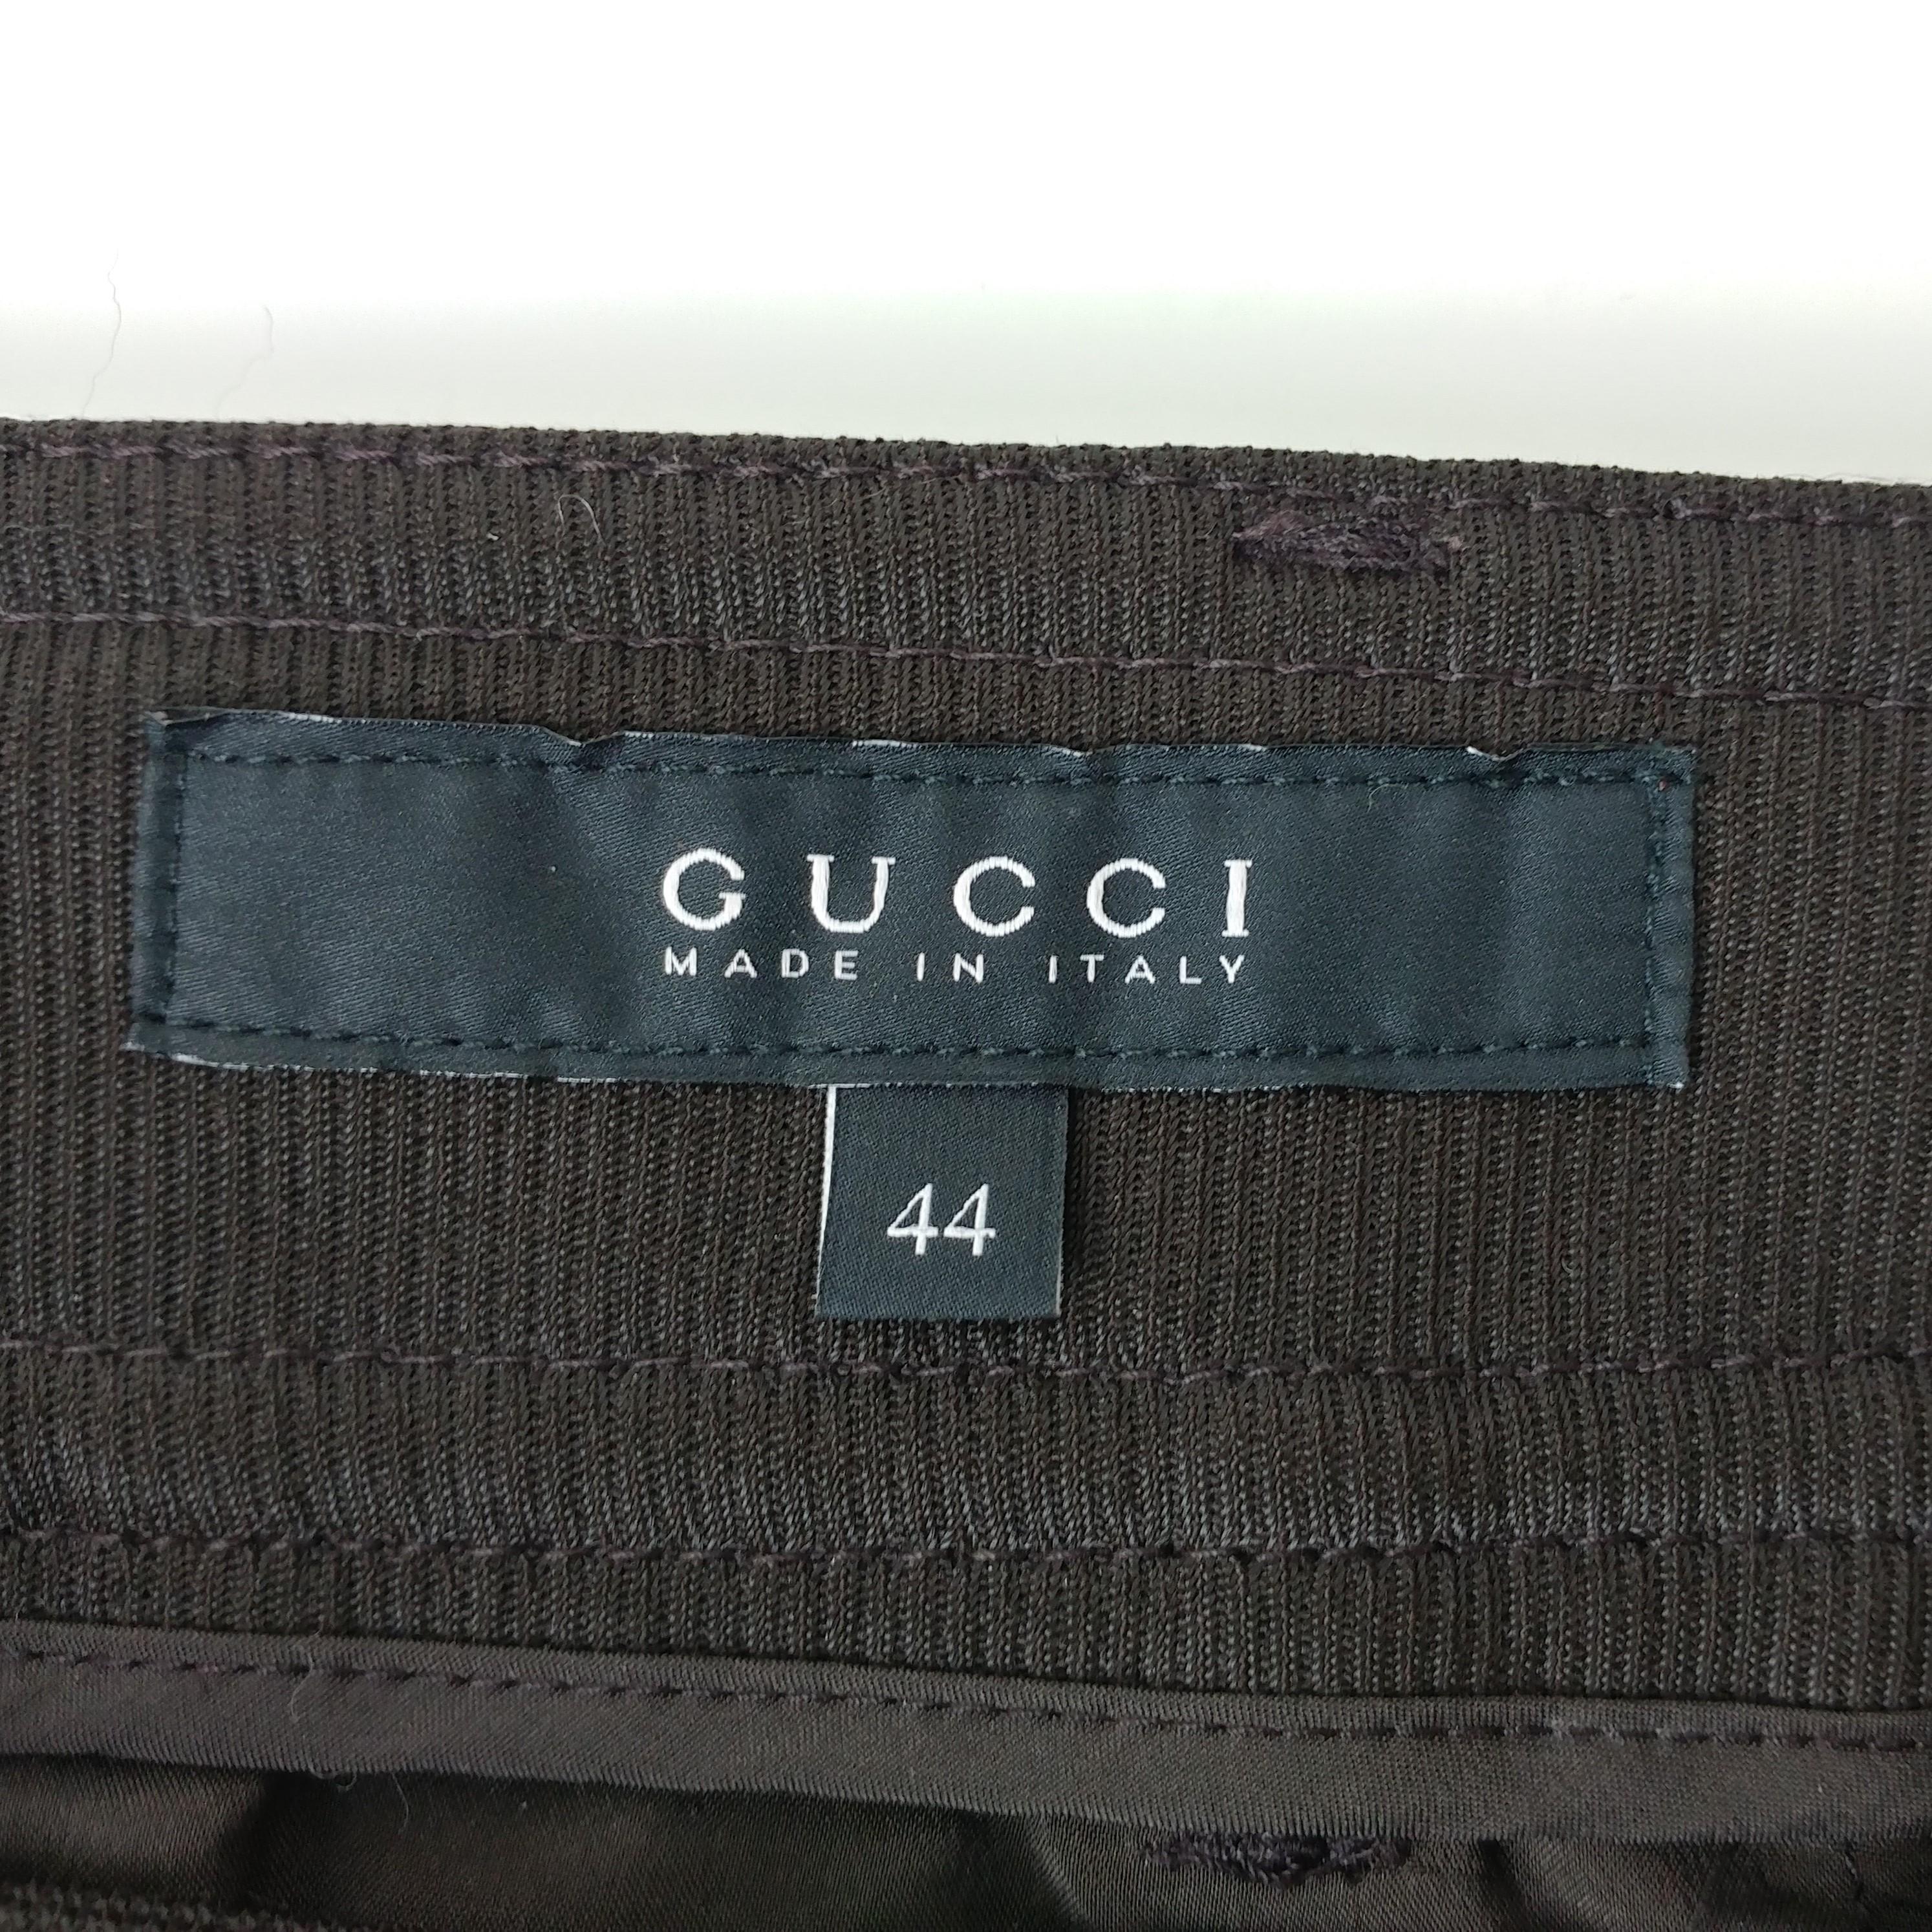 GUCCI – Authentic Brown Chino Rider Pants from the 2008 FW Runway Size 8US 40EU 5